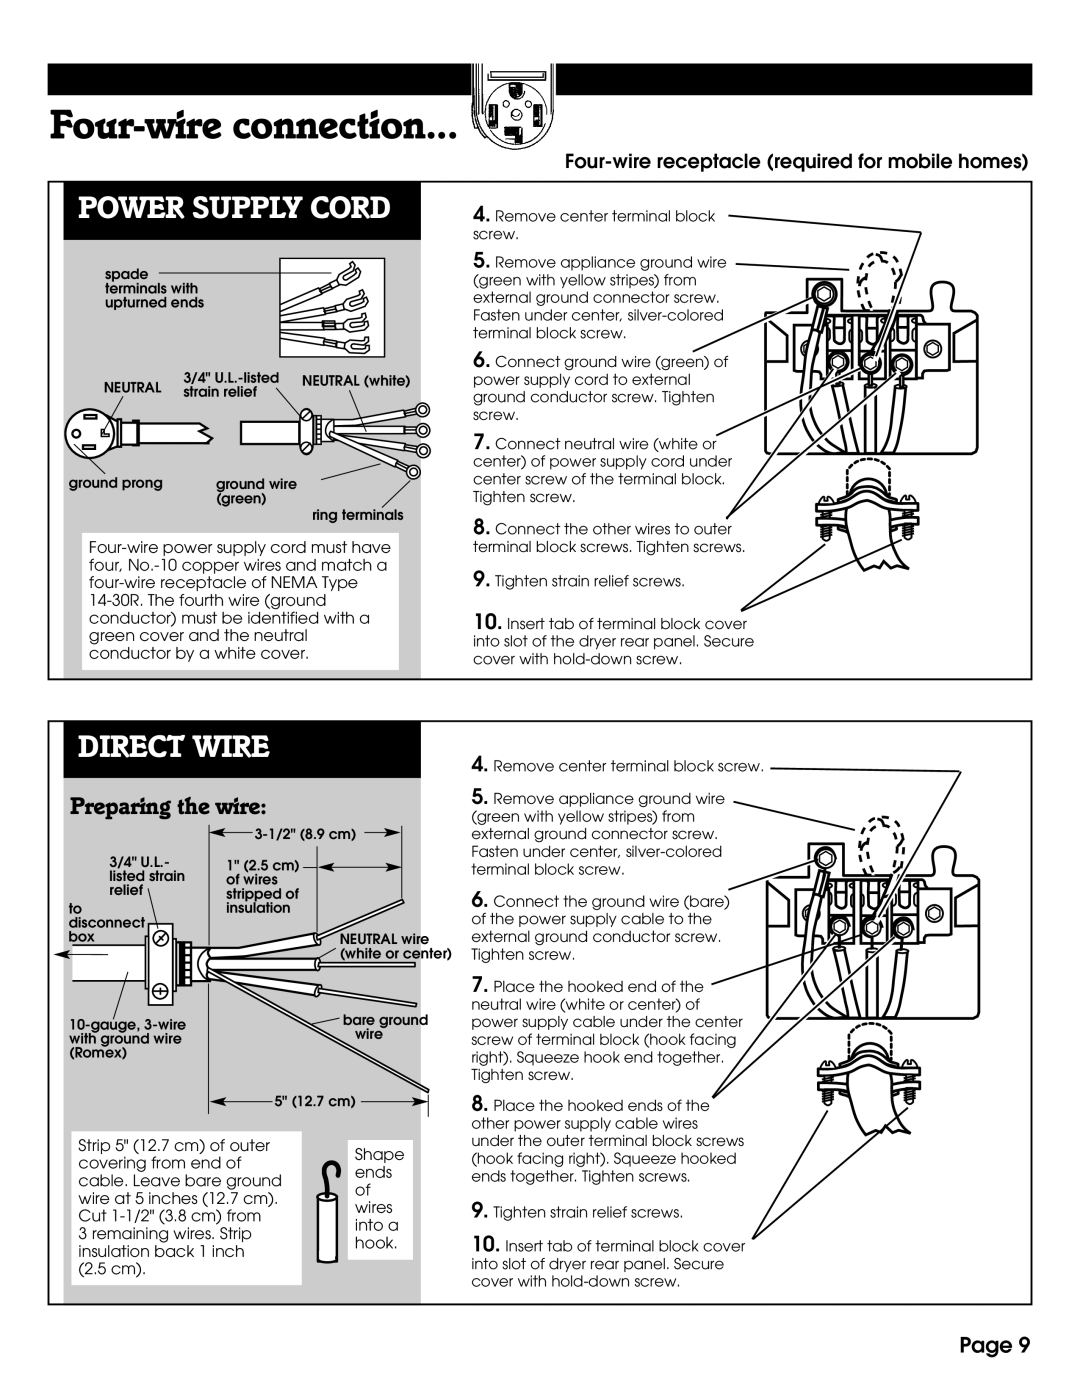 Whirlpool 8527795 installation instructions Four-wire connection, Power Supply Cord, Direct Wire, Preparing the wire, Page 